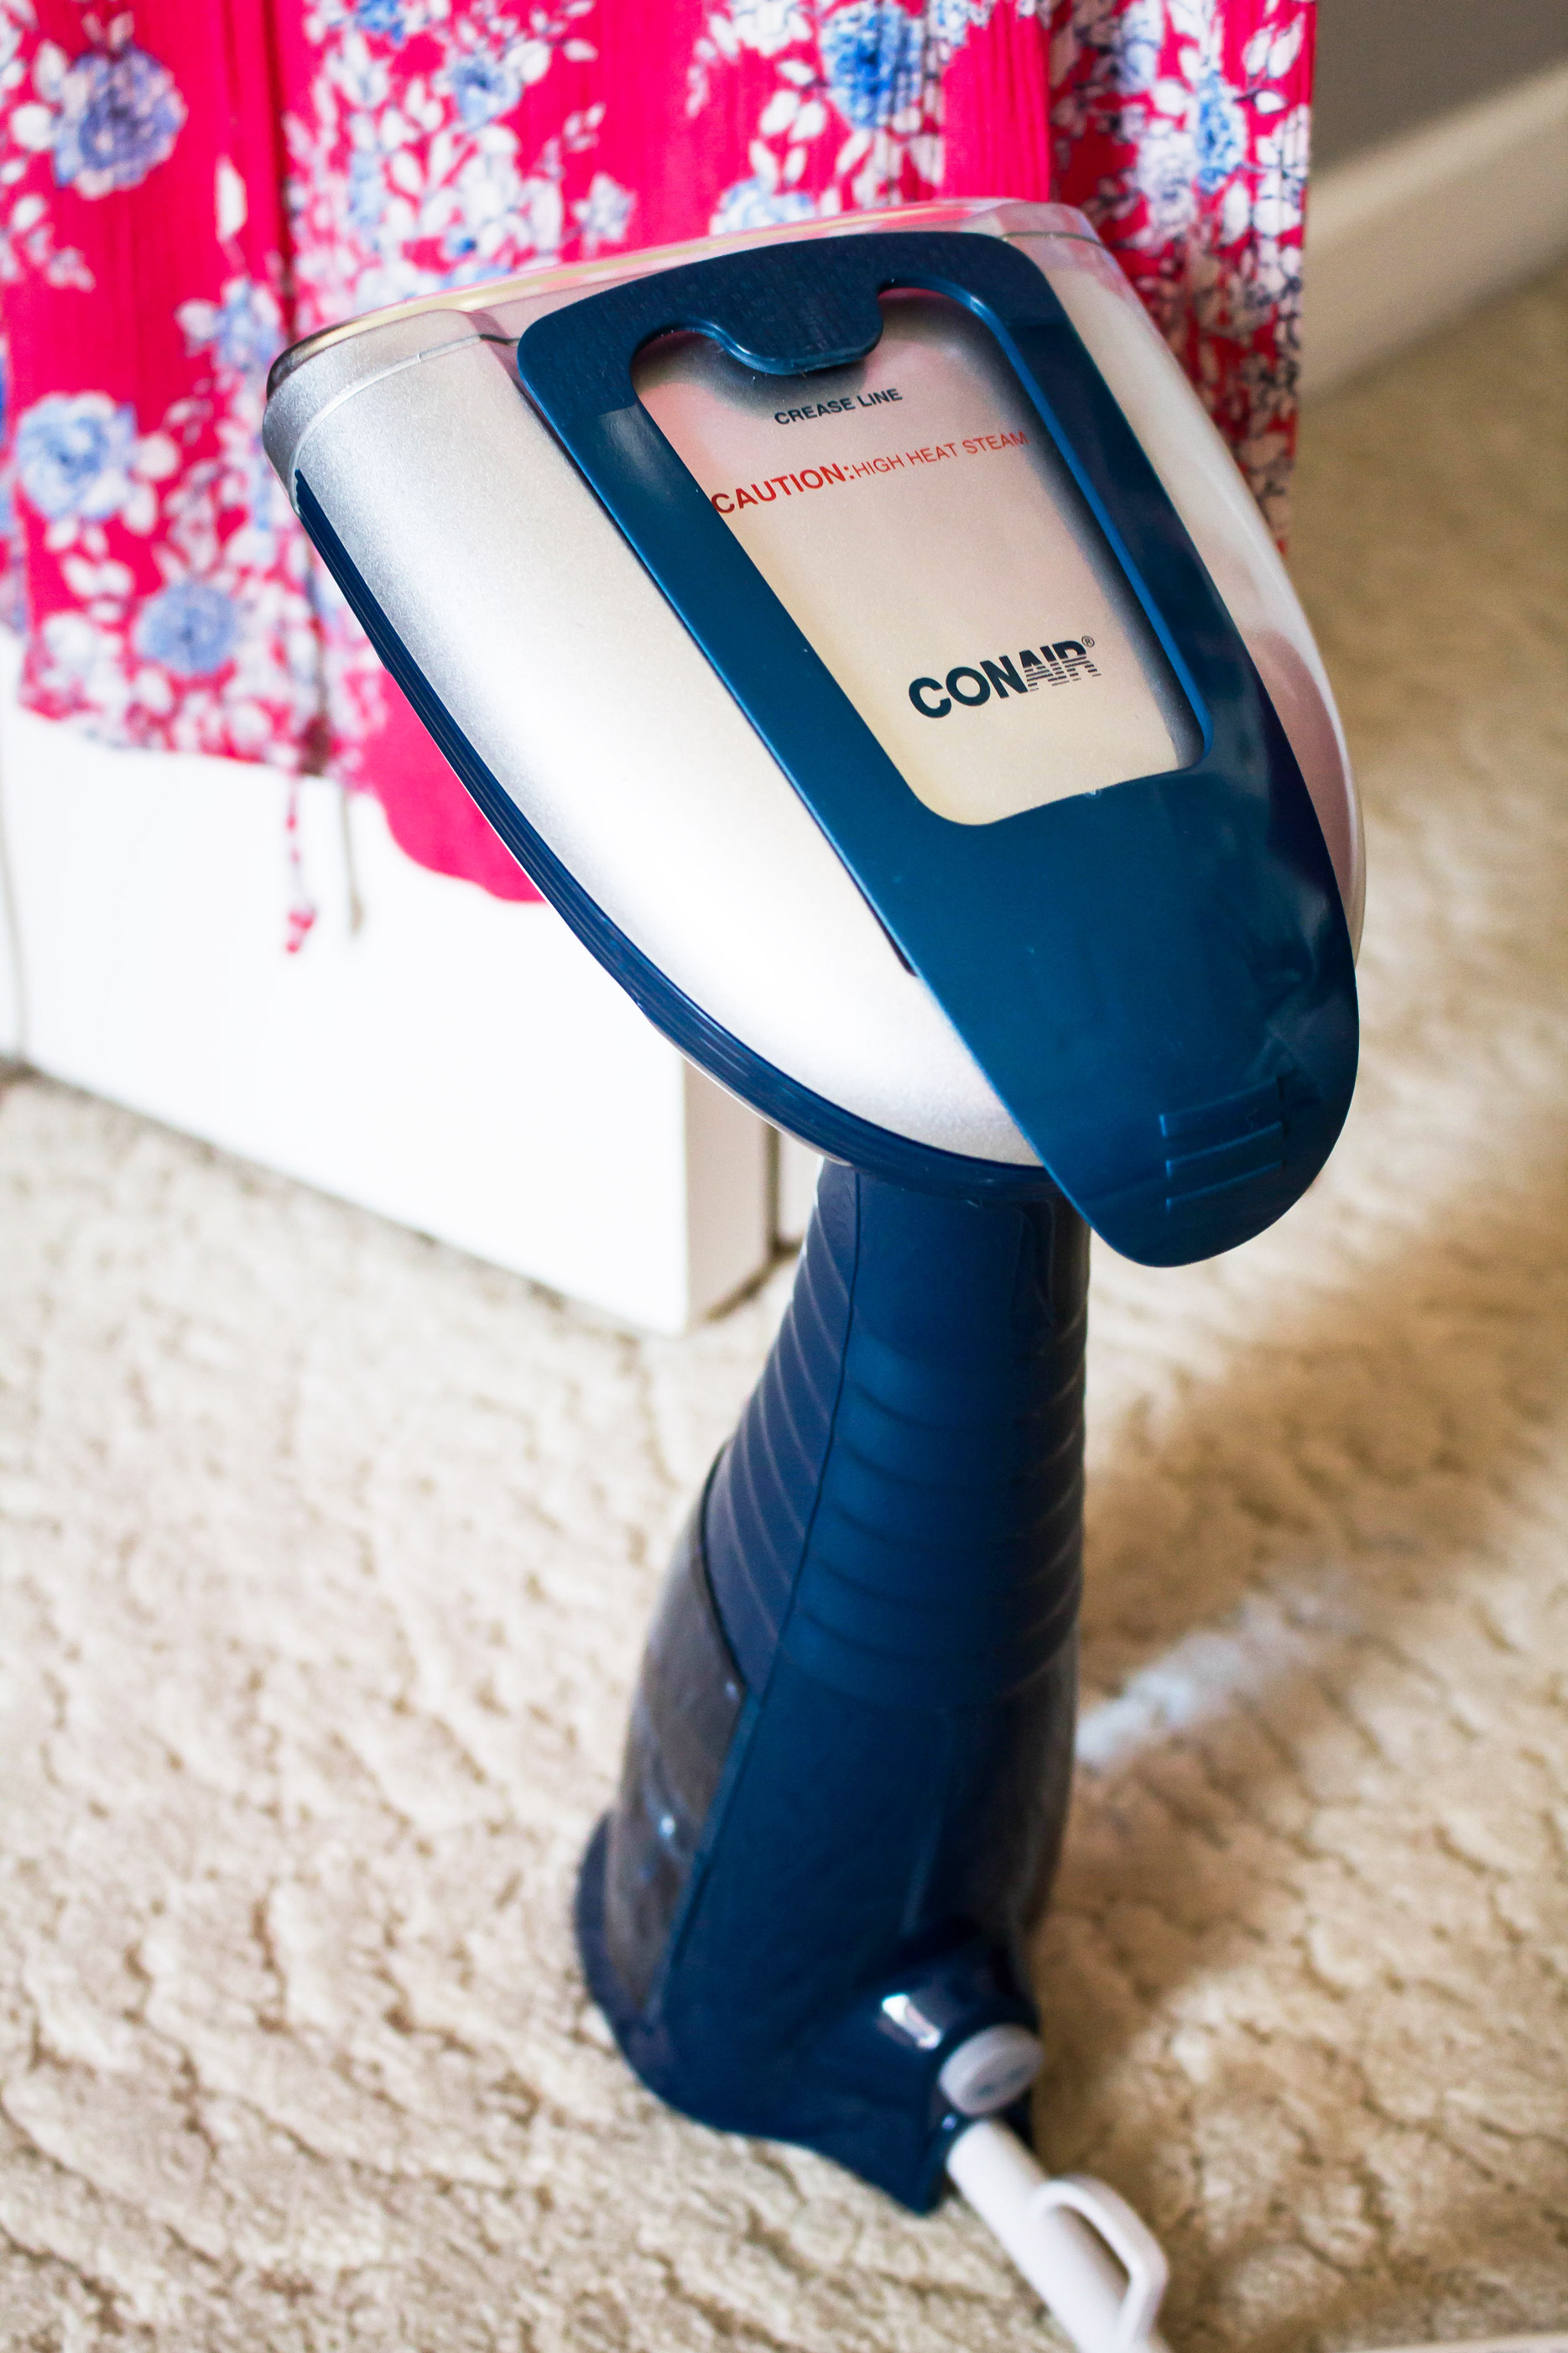 Review: Conair Turbo ExtremeSteam Handheld Fabric Steamer